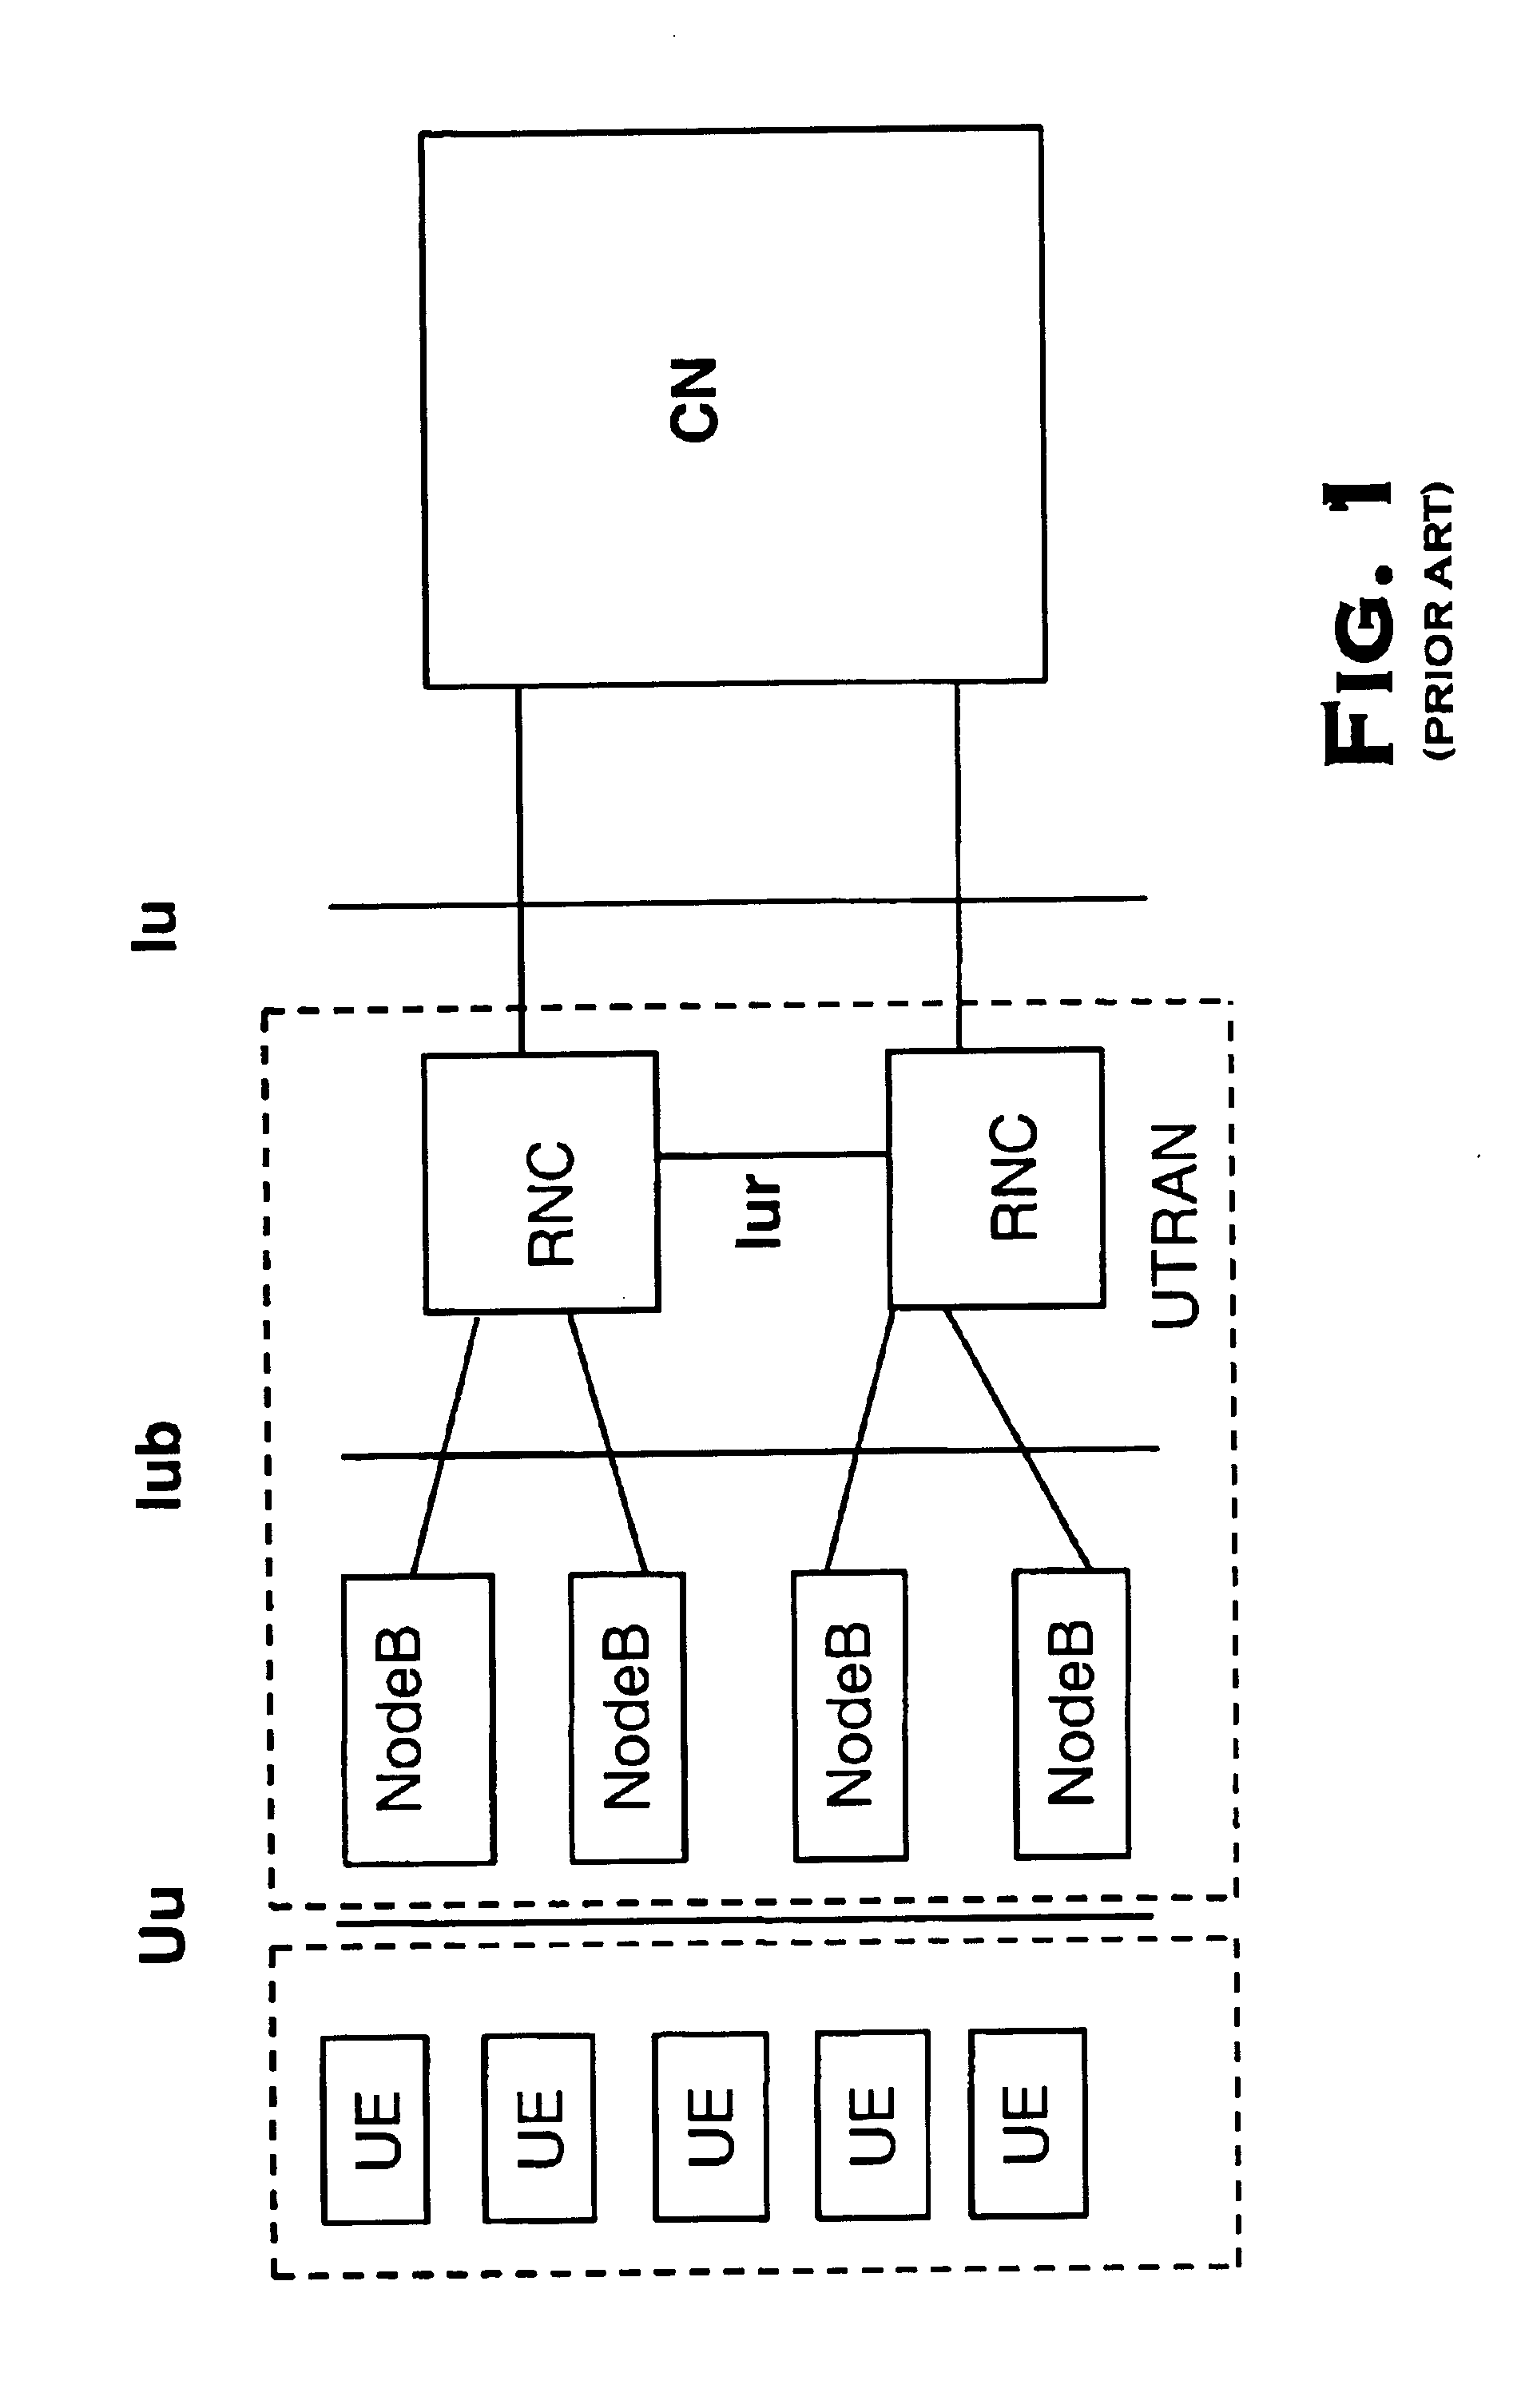 Link-quality estimation method and components for multi-user wireless communication systems